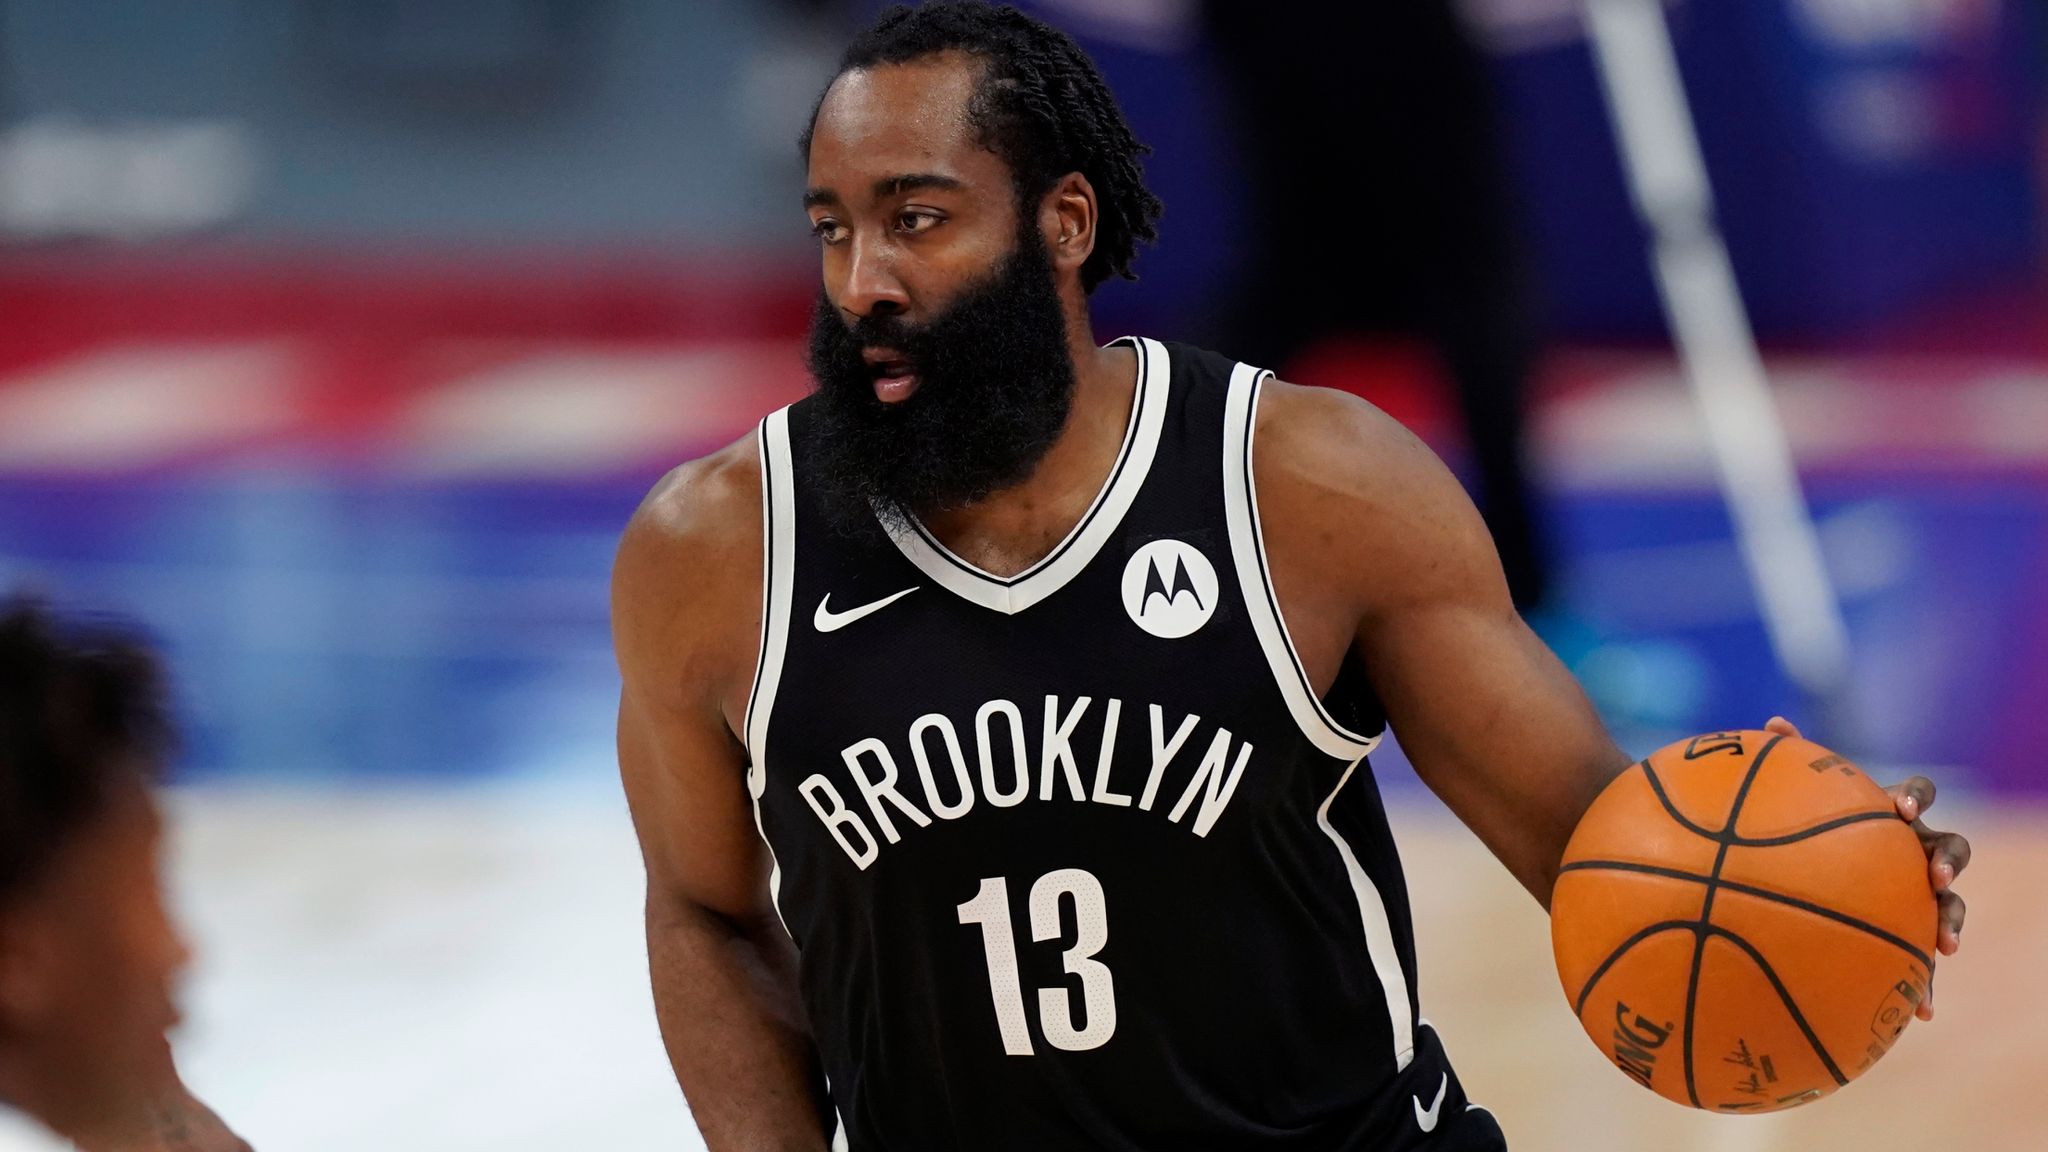 Nba James Harden Hits 44 Points As Brooklyn Nets Hold Off Detroit Pistons In Friday Night Action Nba News Sky Sports